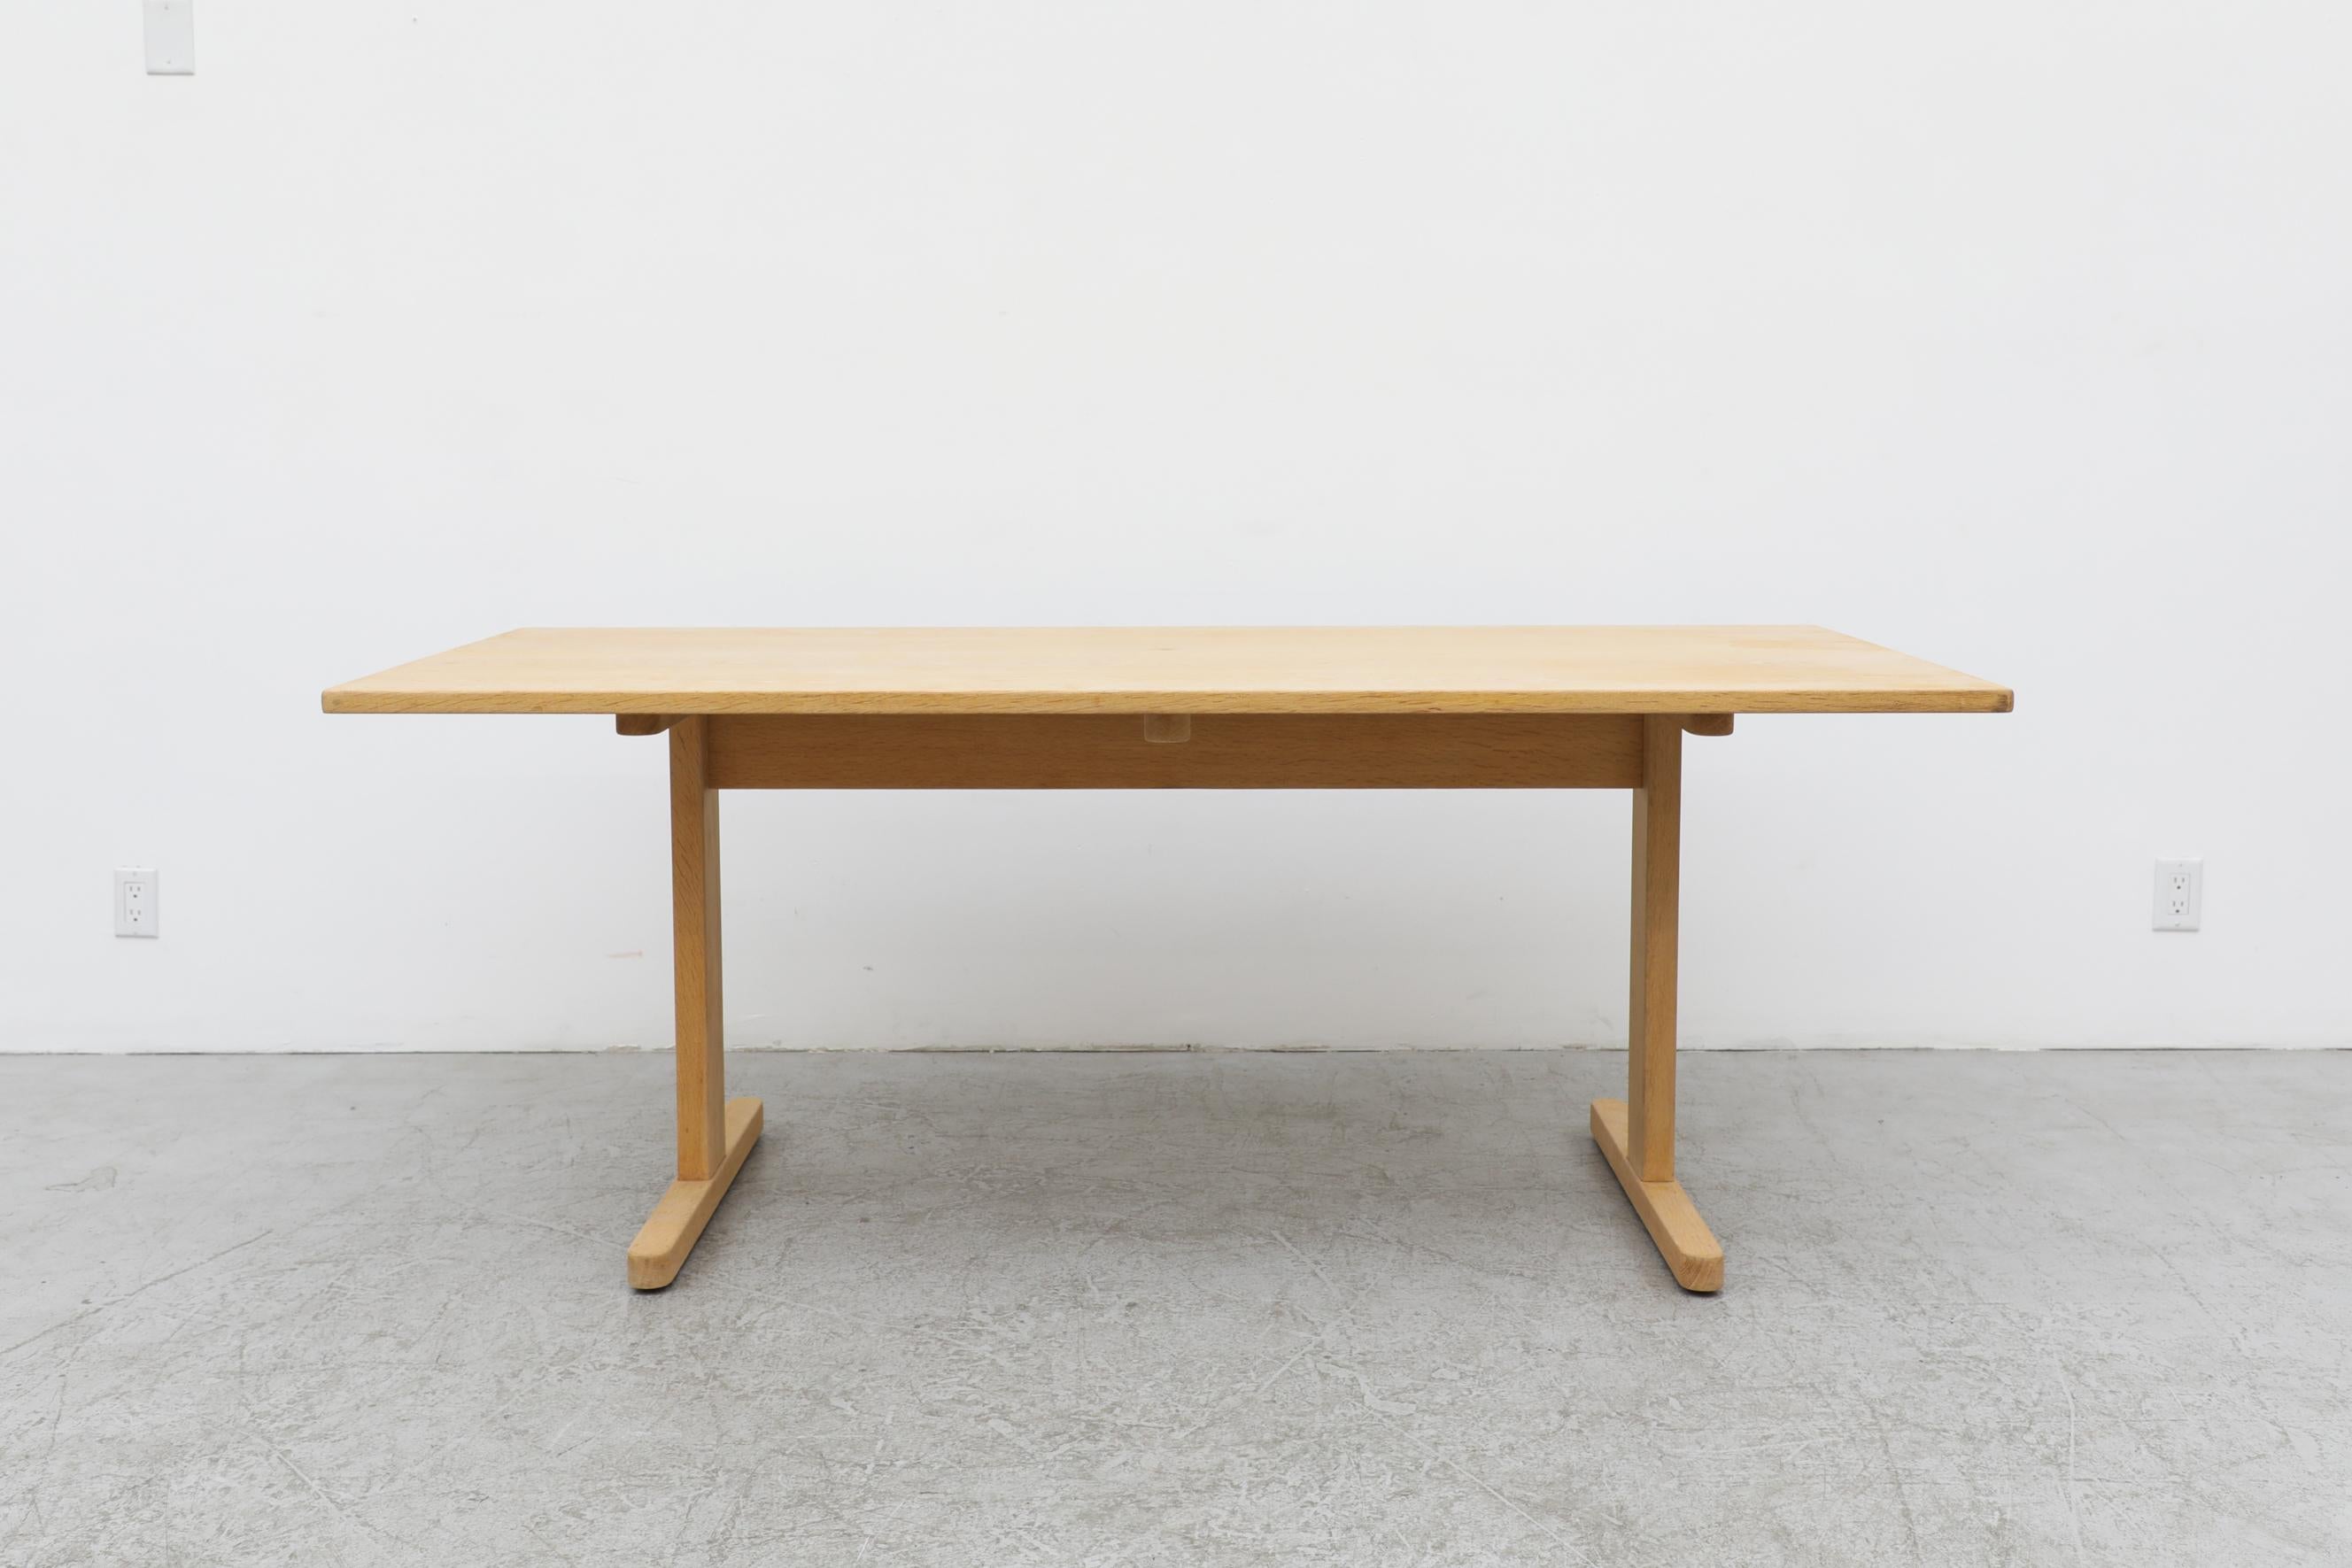 Designed by Børge Mogensen, a towering figure in the world of Danish mid century design, this oak trestle base dining table is in good original condition with some wear consistent with its age and use. Other dining tables are available and listed